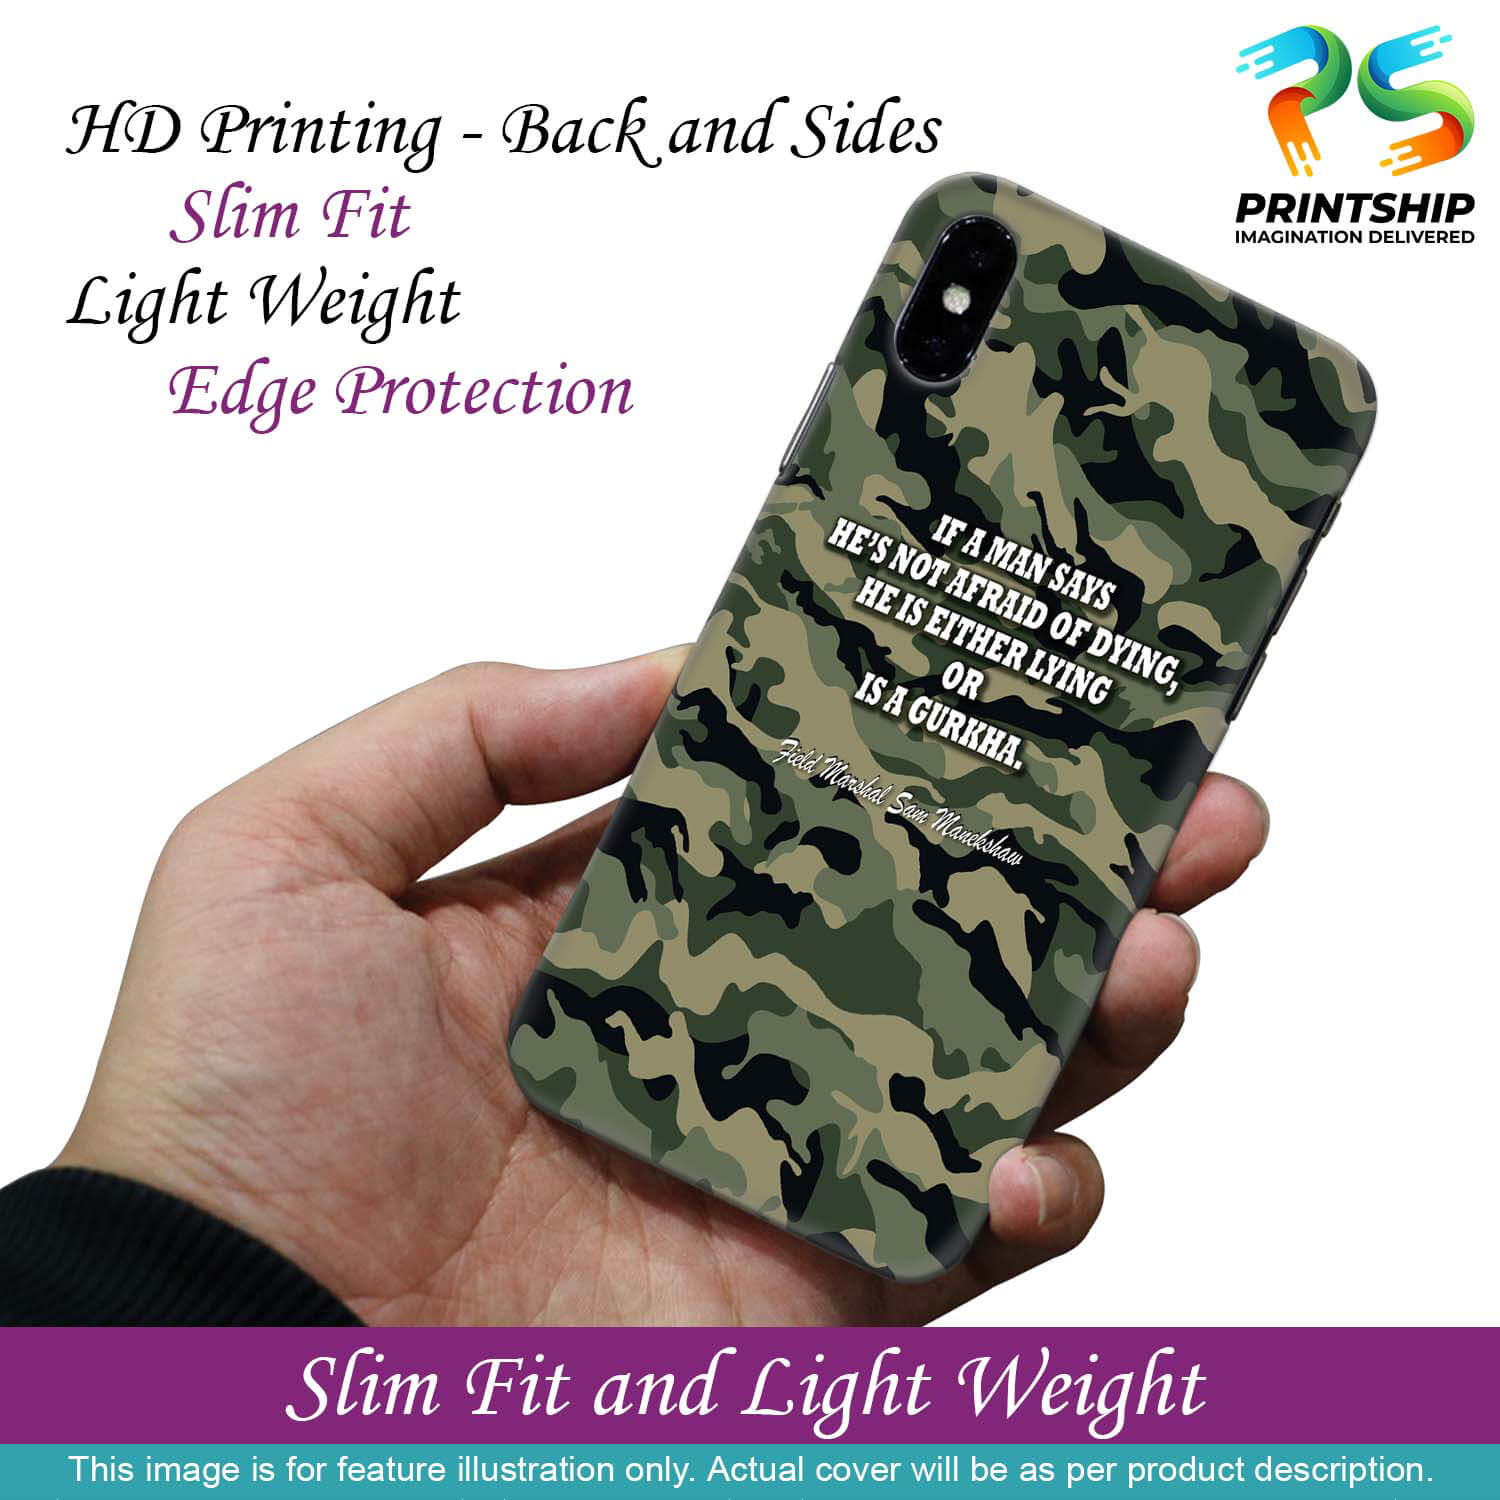 W0450-Indian Army Quote Back Cover for Samsung Galaxy A70s